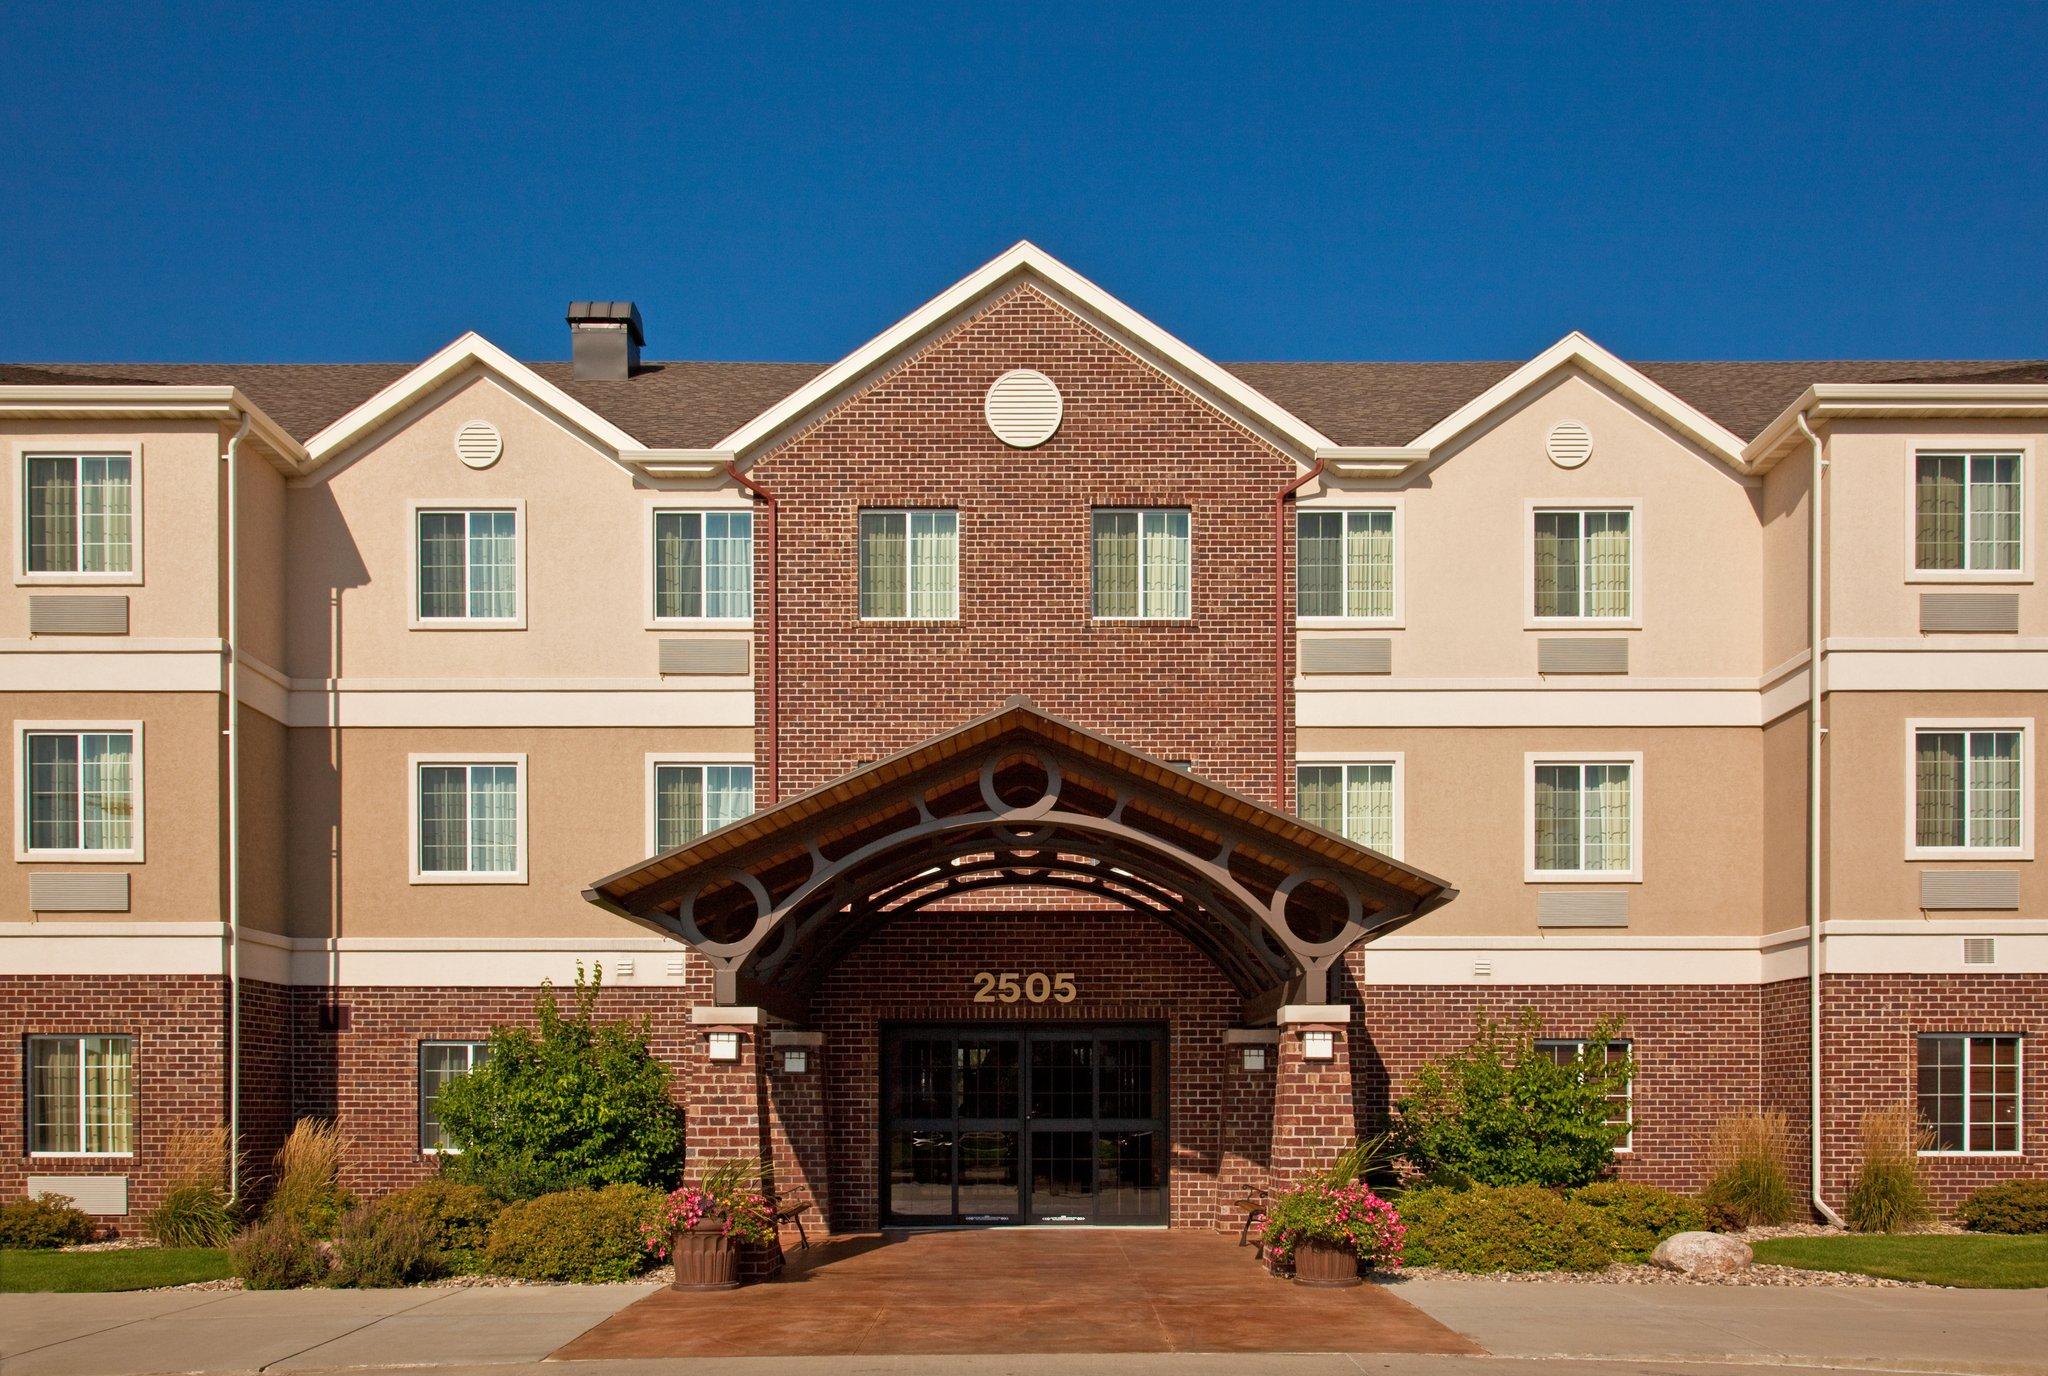 Staybridge Suites in Sioux Falls, SD